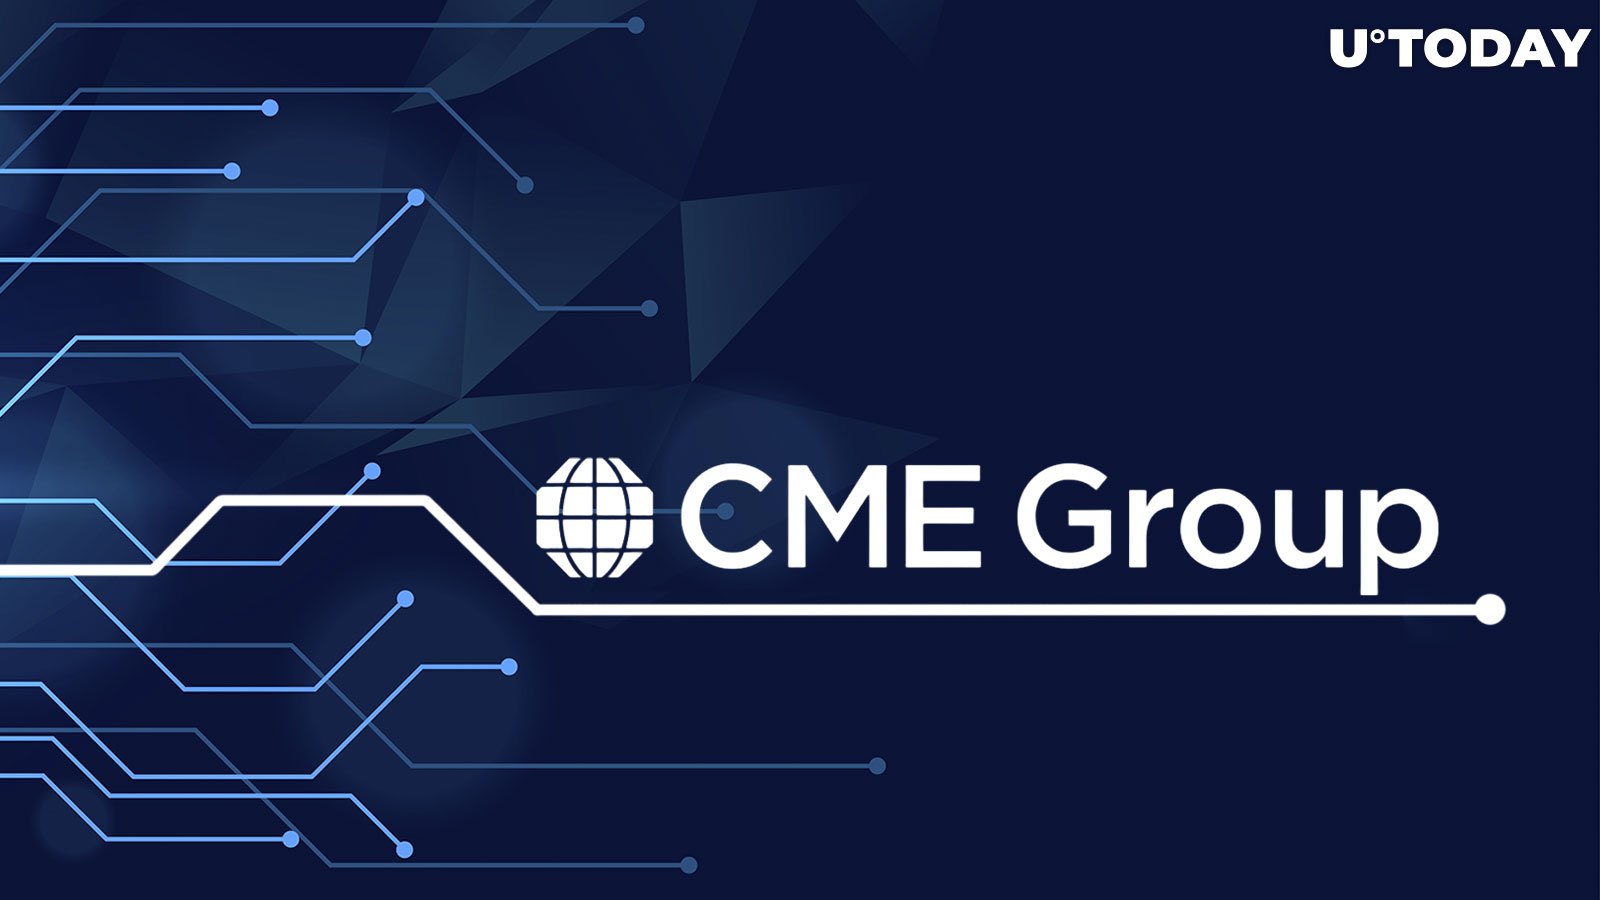 CME CEO Remains Optimistic About Crypto Despite Sell-Off